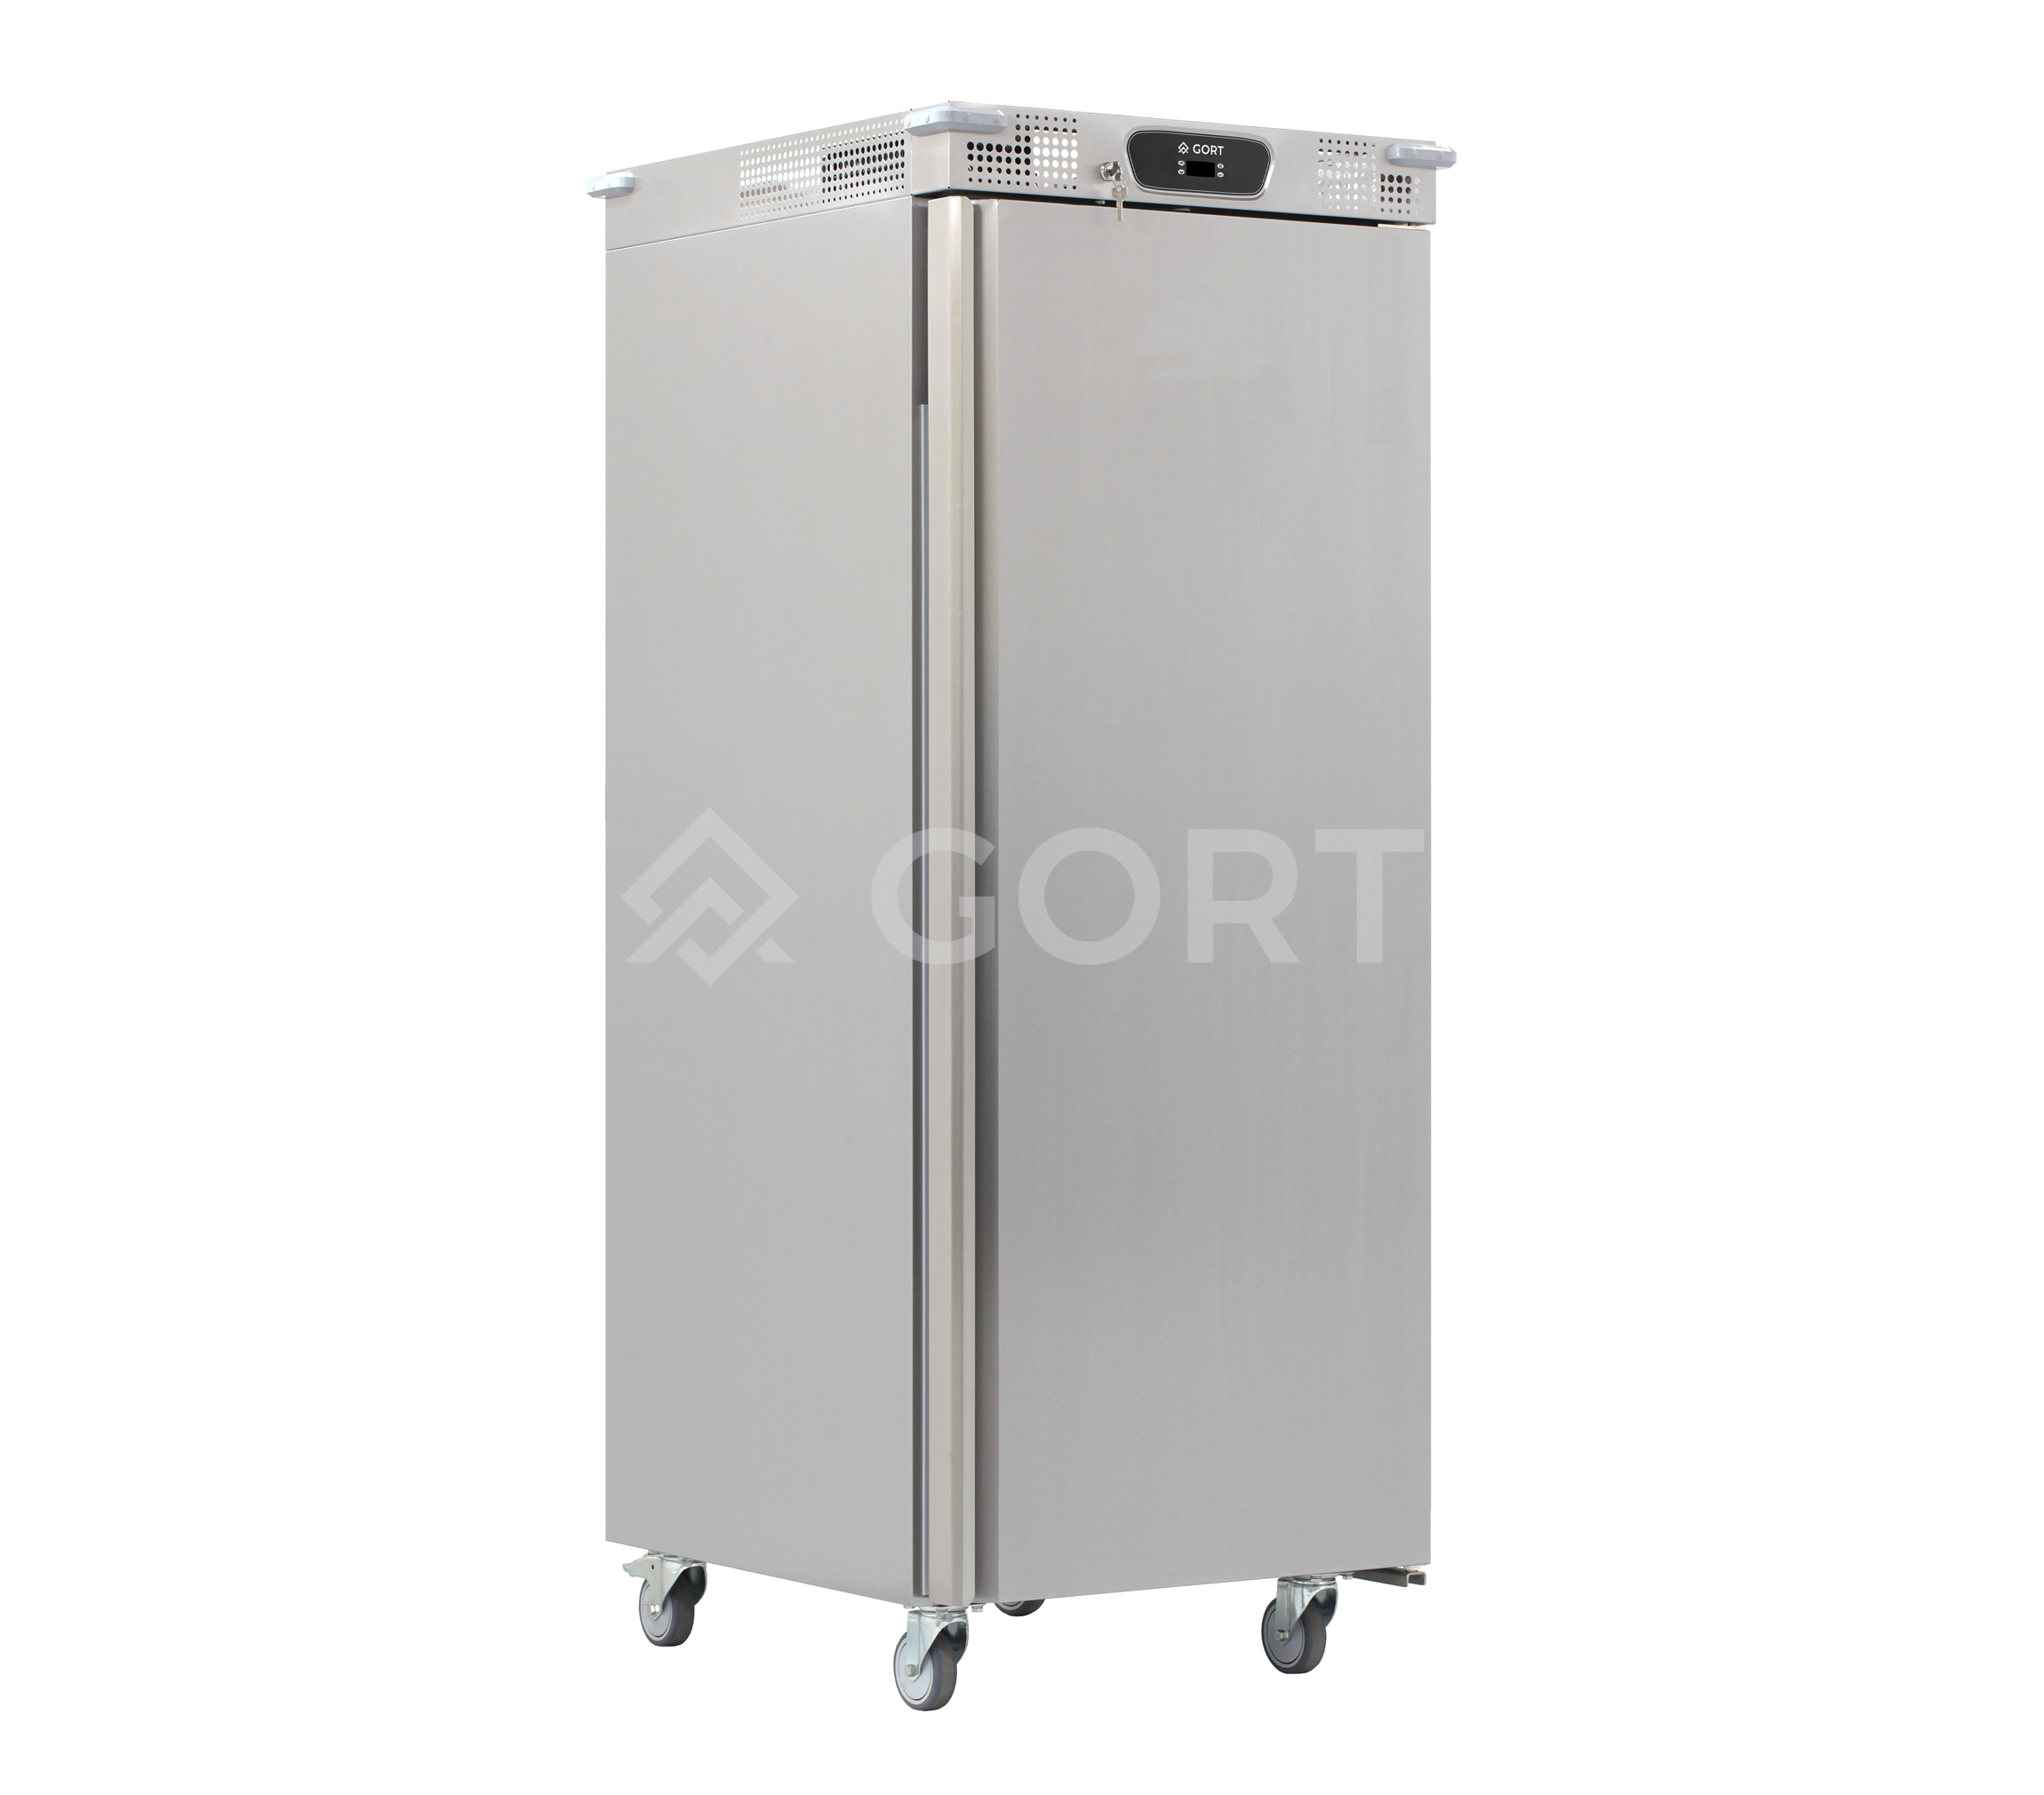 Banquet refrigerated cabinet, single